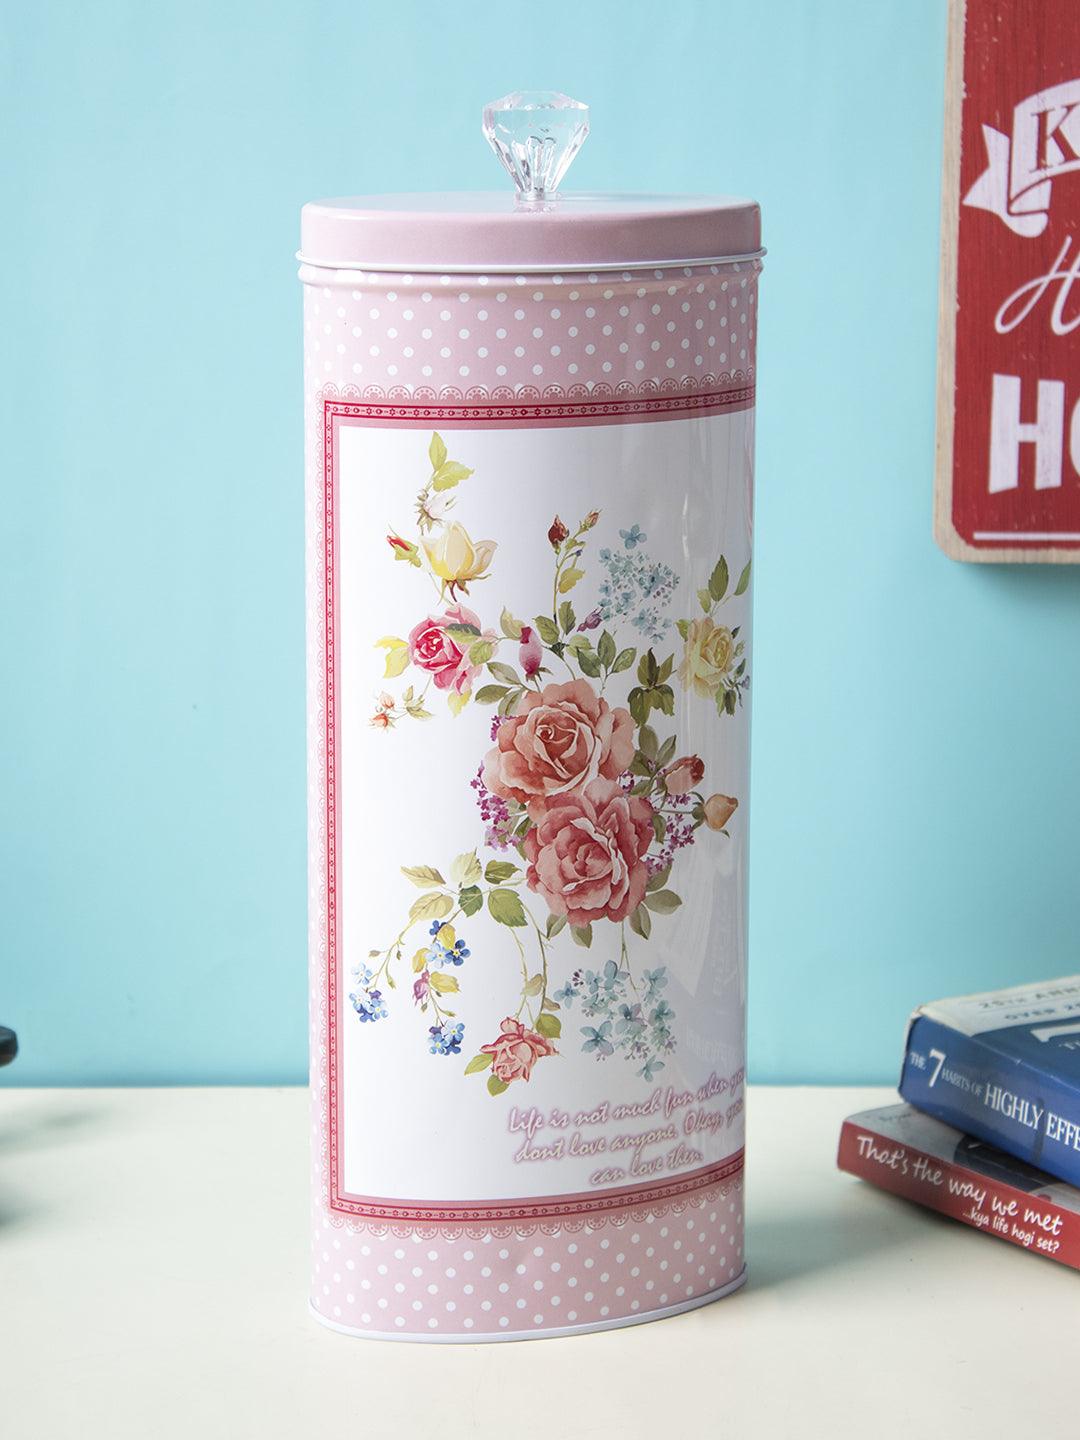 Pink Dry Food Storage Cansister With Lid - Floral Prints